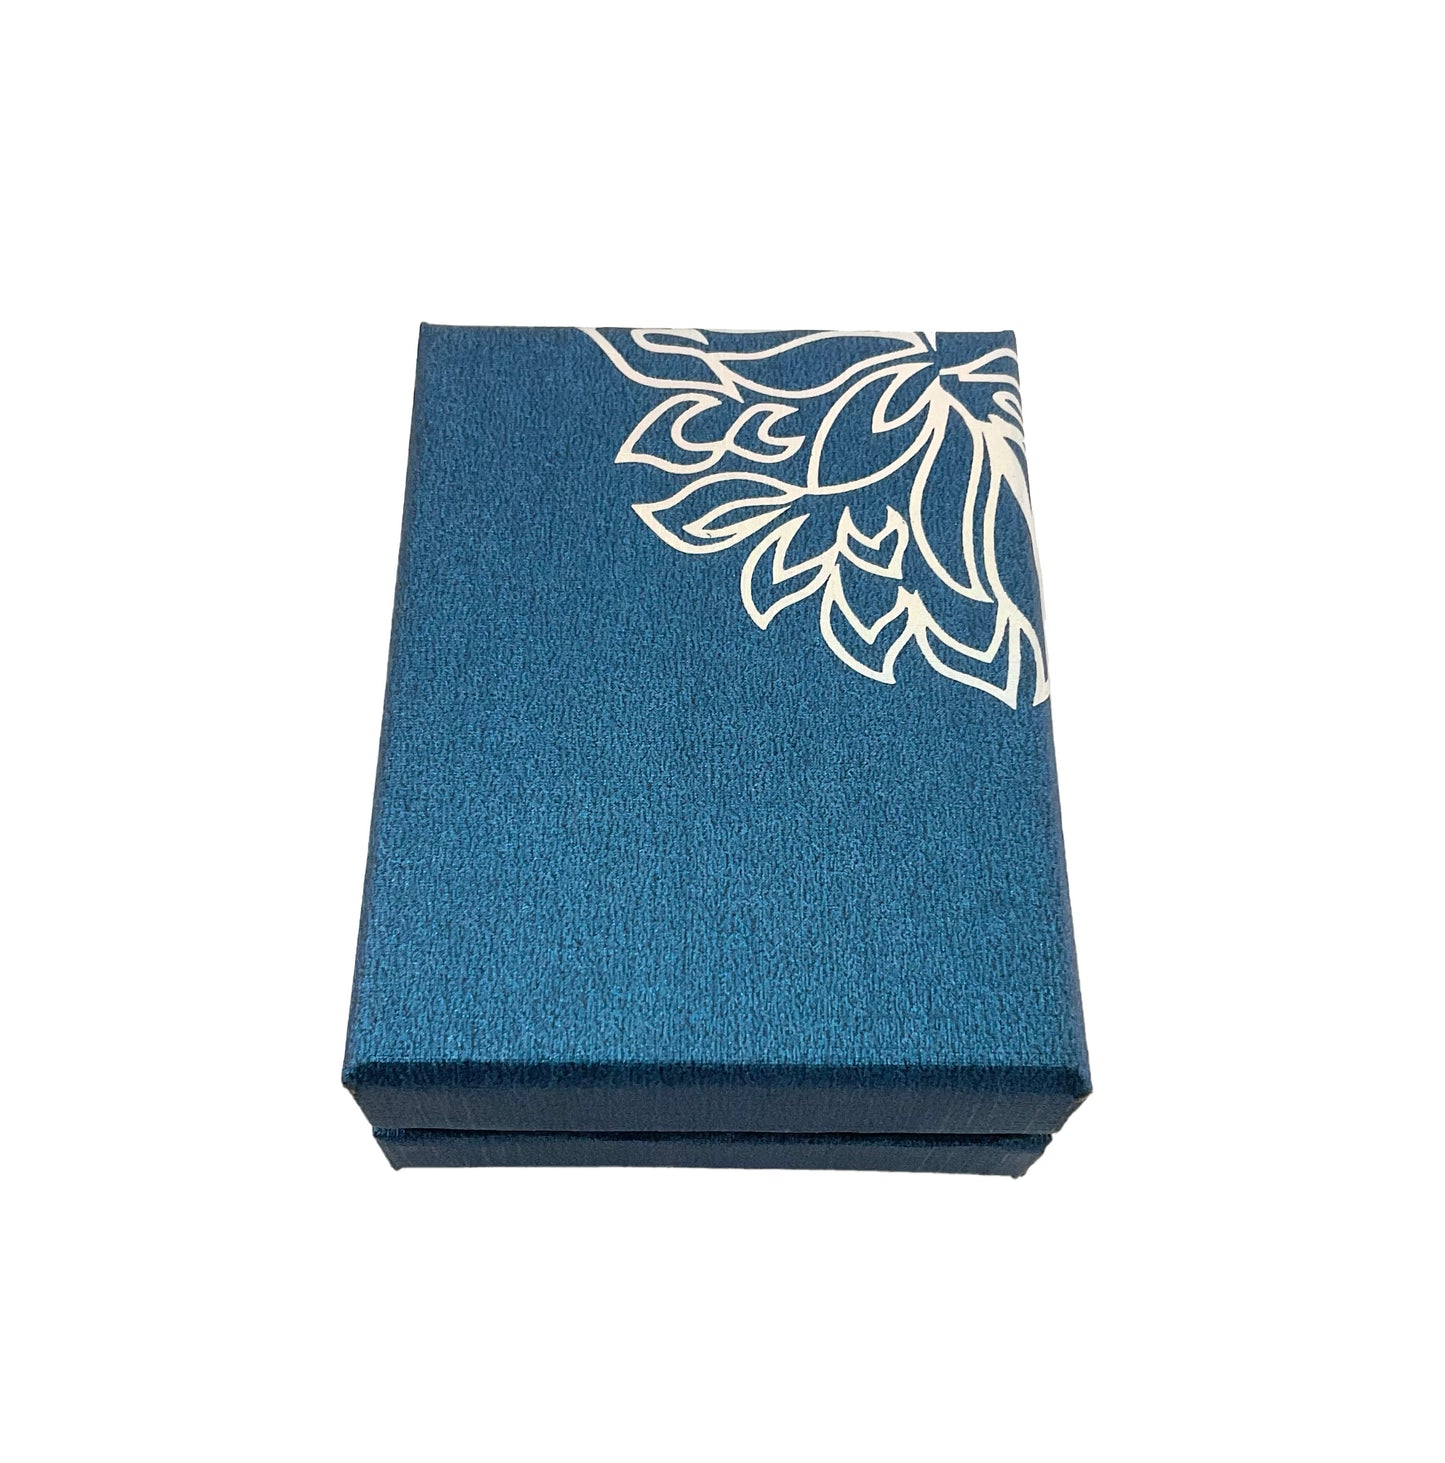 Blue Gift Boxes 24 pieces #88-08860